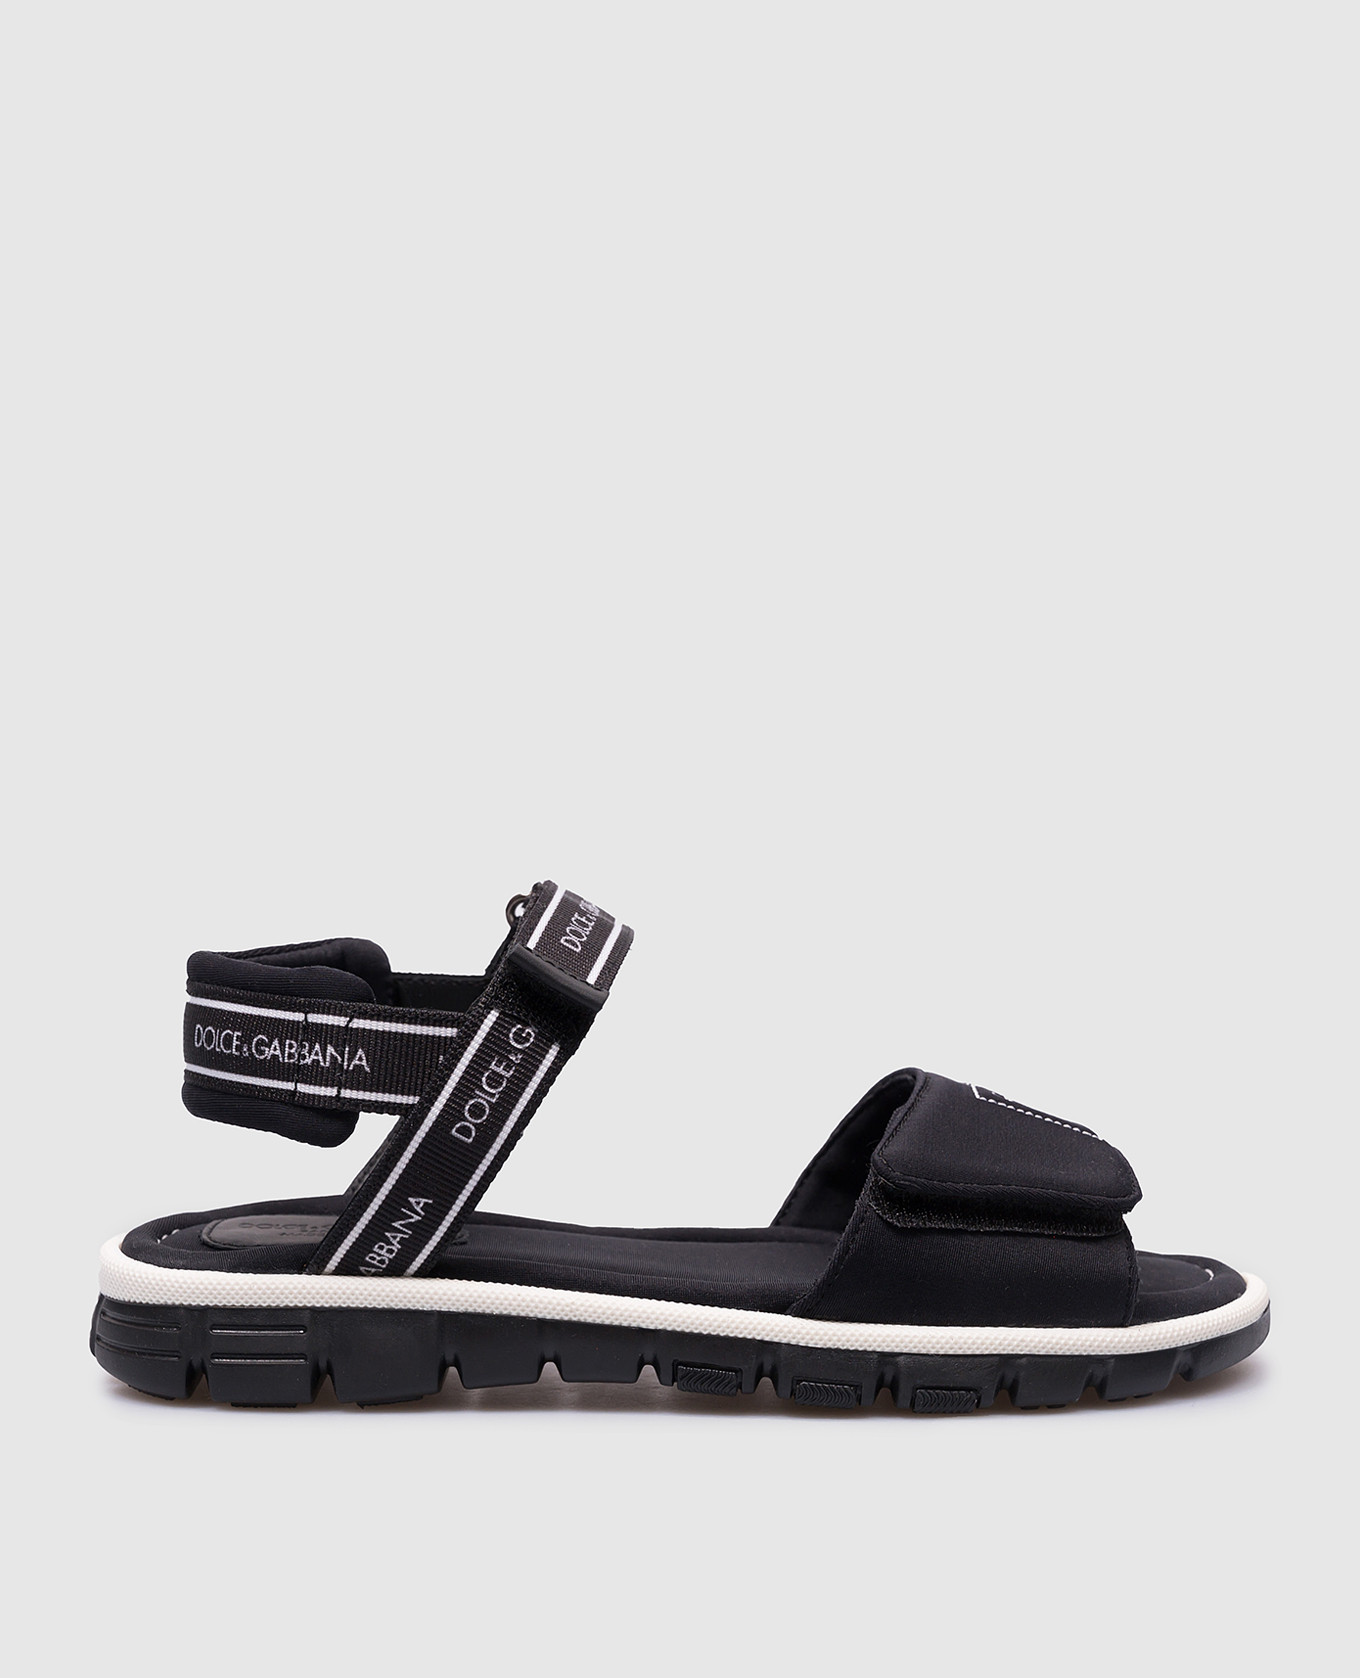 Children's black sandals with DG logo embroidery